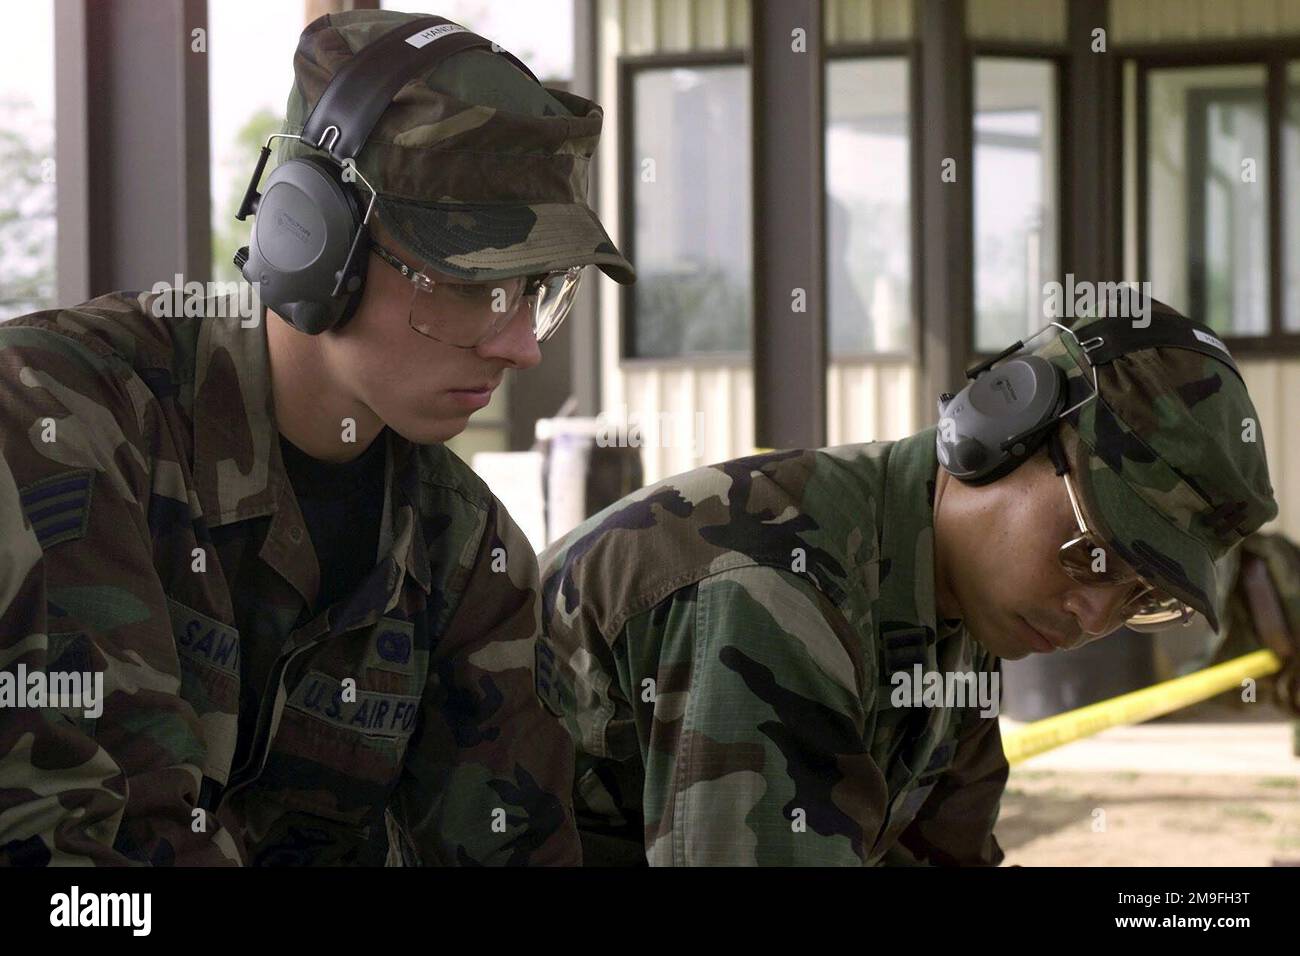 US Air Force SENIOR AIRMAN Eric Sawyer and US Air Force Captain Steve Sugiyama, from the 11th Wing, sit in deep concentration during the handgun portion of DEFENDER CHALLENGE 2000 at Lackland Air Force Base, Texas. Defender Challenge is the annual Air Force wide competition sponsored by Air Force Security Forces. This competition showcases the talents and capabilities of 13 international Security Forces teams in seven physical fitness, base defense, and policing skills over six days. Subject Operation/Series: DEFENDER CHALLENGE '00 Base: Lackland Air Force Base State: Texas (TX) Country: Unite Stock Photo